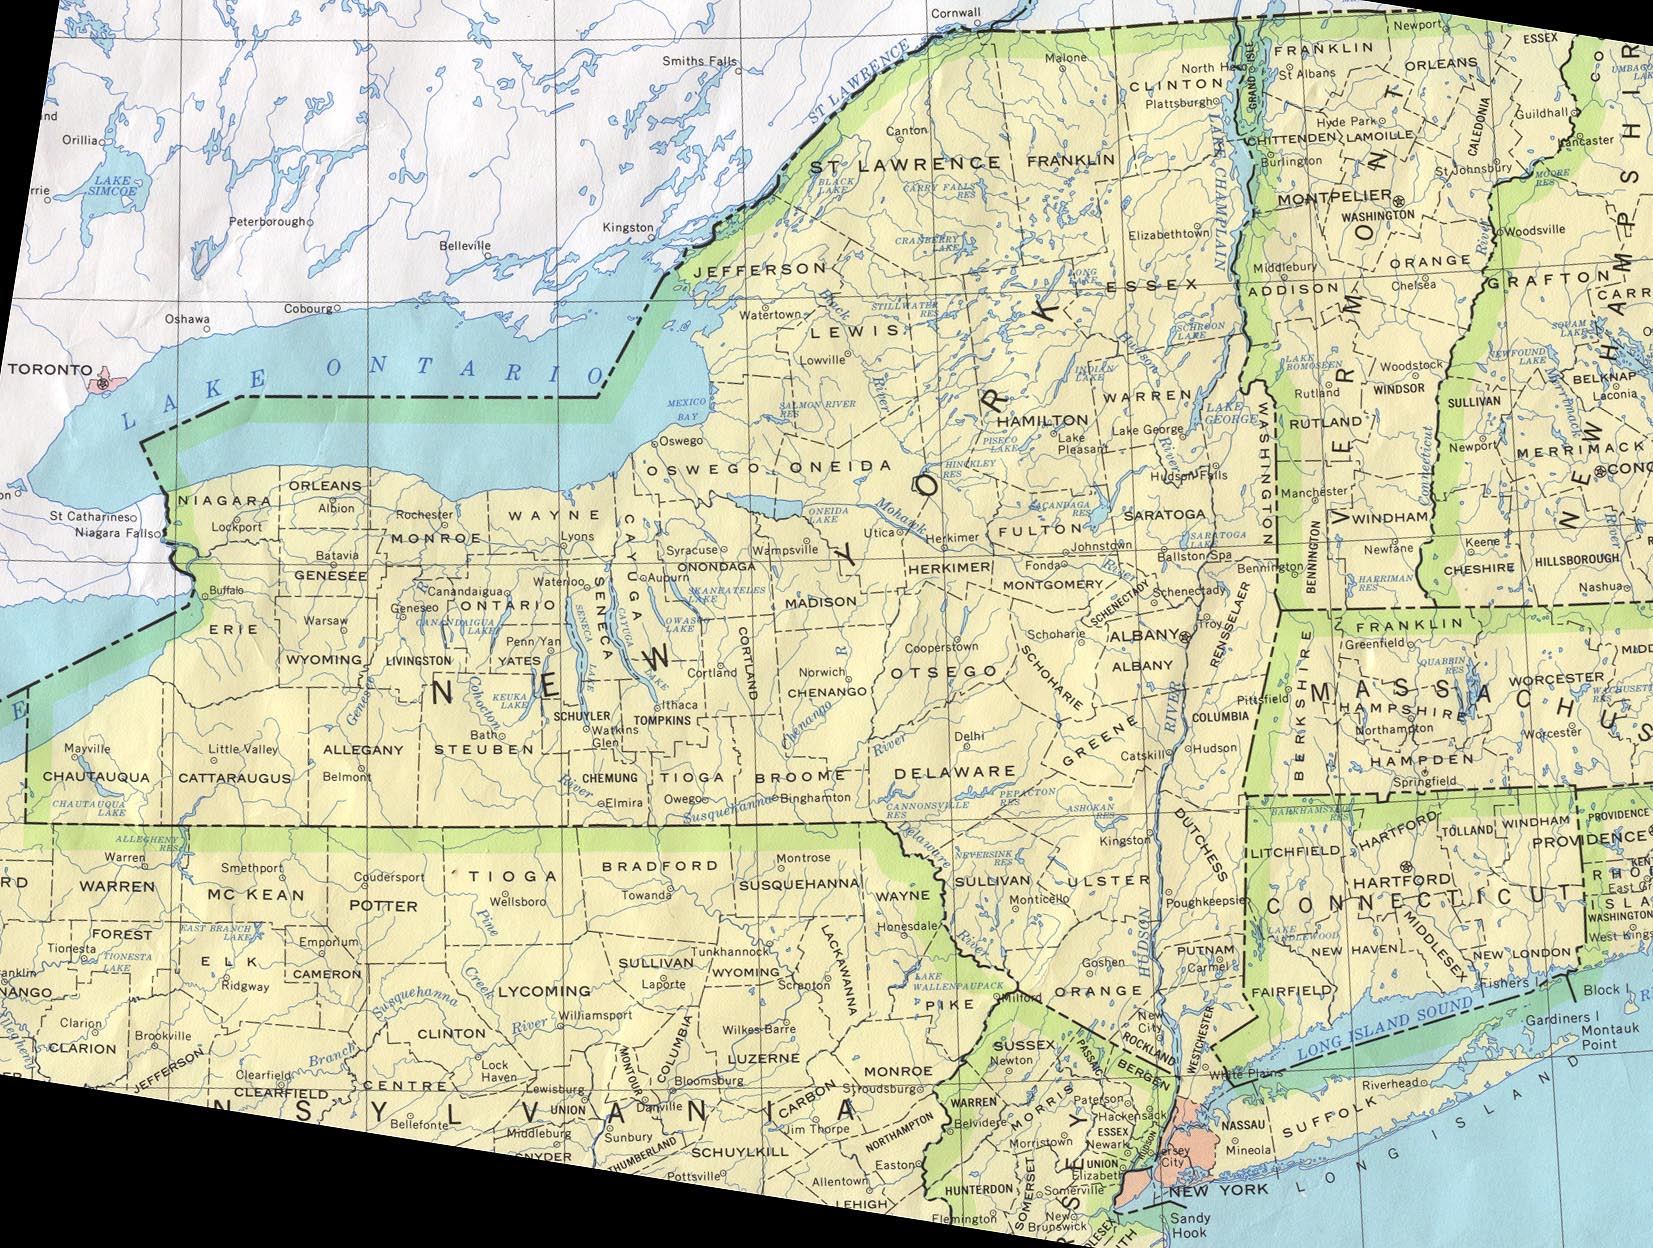 To zoom in, click on the Base reference Map of NY State on the right